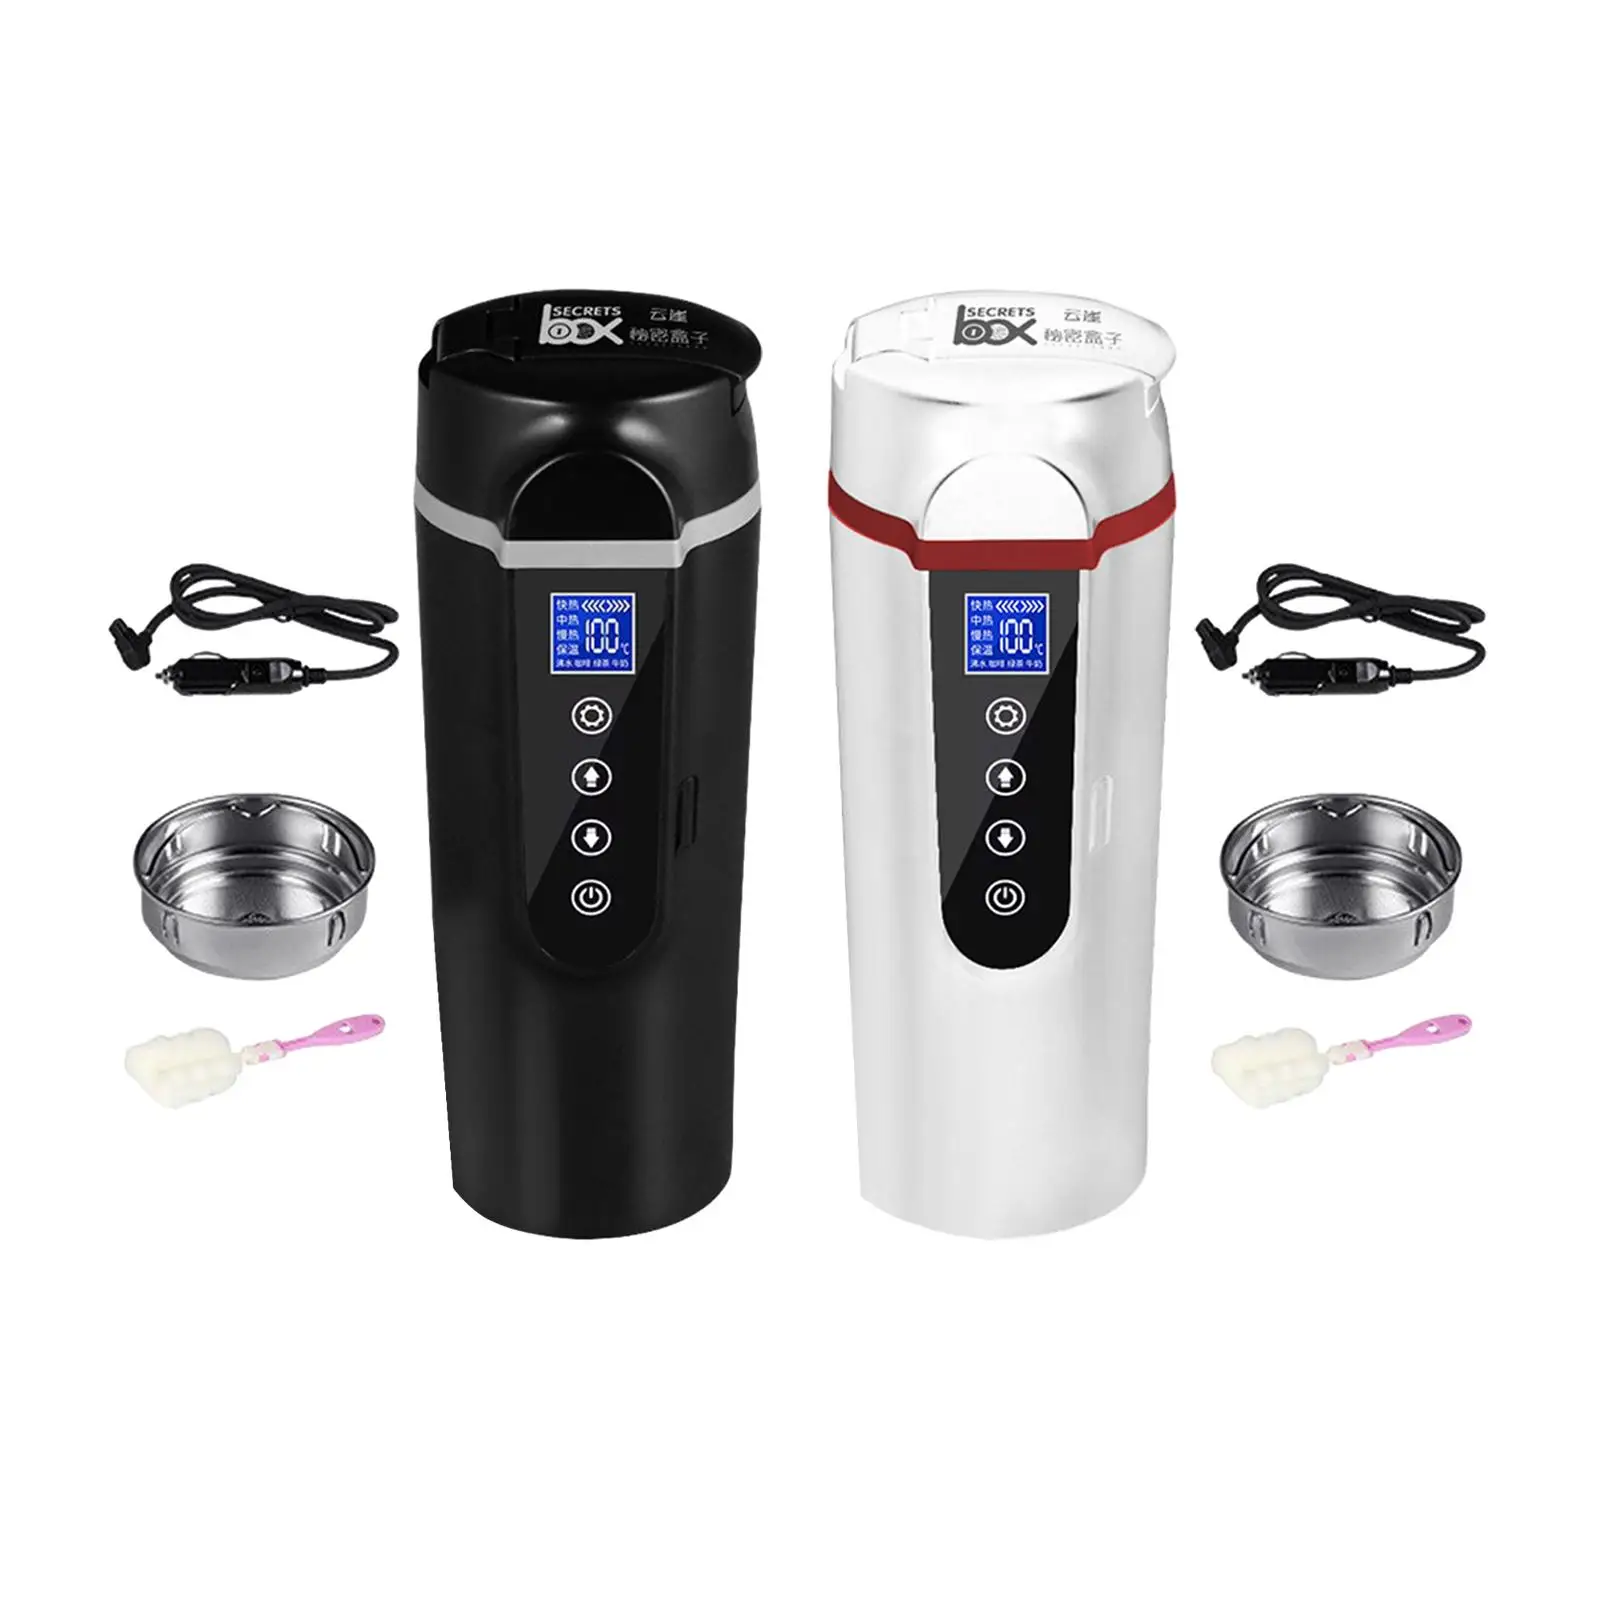 Car Heating Cup Thermal Insulation Water Boiler Quick Heating Variable Temp Control LED Display Travel Coffee Mug for Auto Car